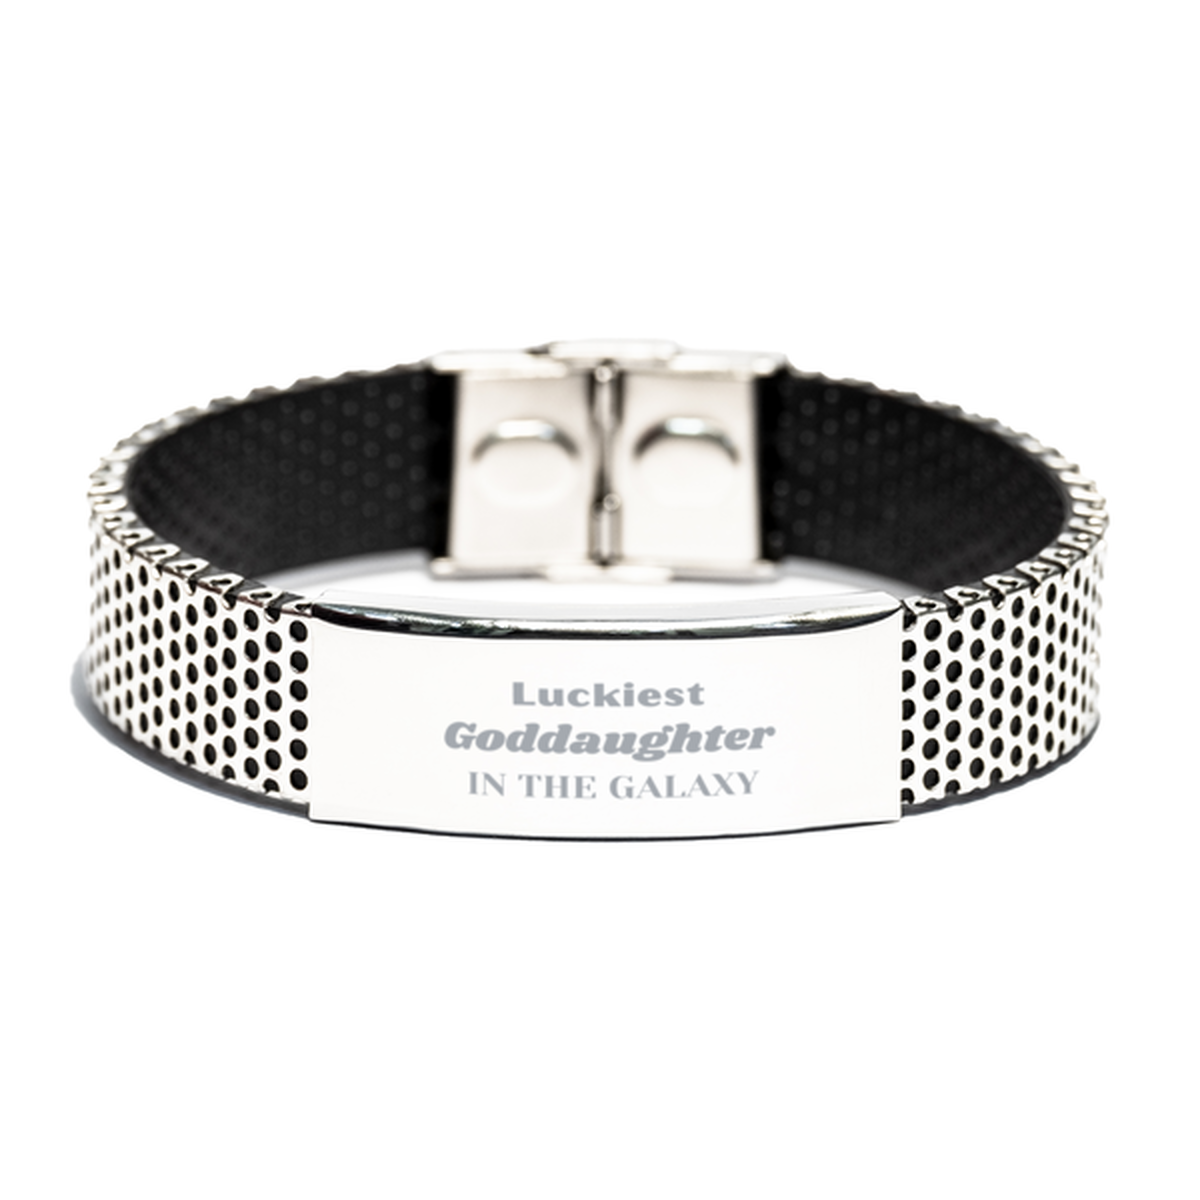 Luckiest Goddaughter in the Galaxy, To My Goddaughter Engraved Gifts, Christmas Goddaughter Stainless Steel Bracelet Gifts, X-mas Birthday Unique Gifts For Goddaughter Men Women